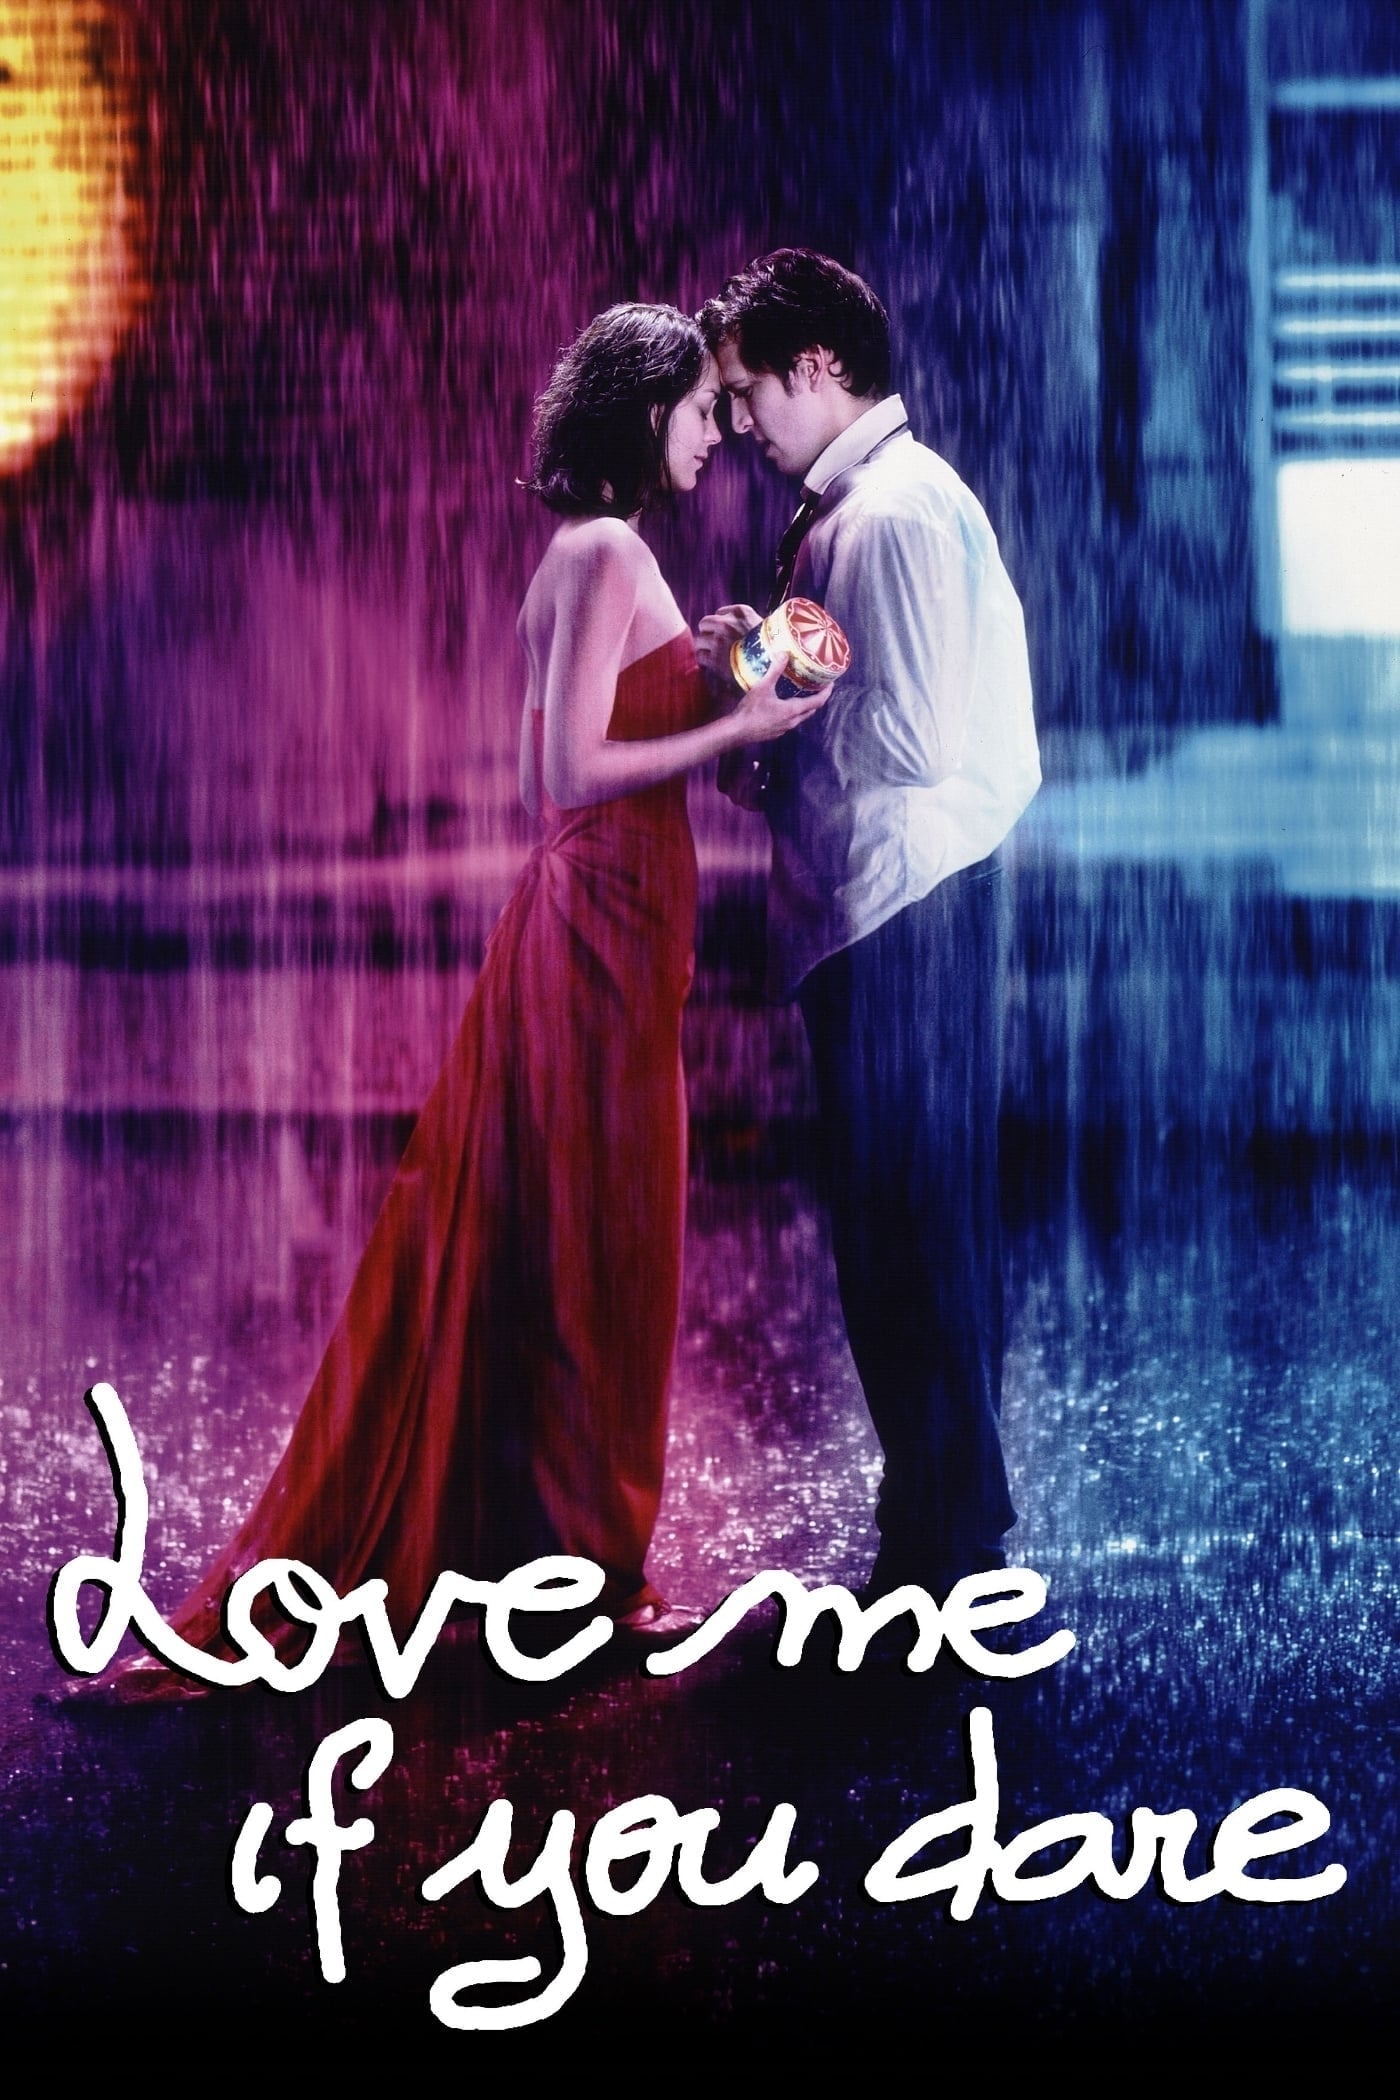 Poster for the movie "Love Me If You Dare"